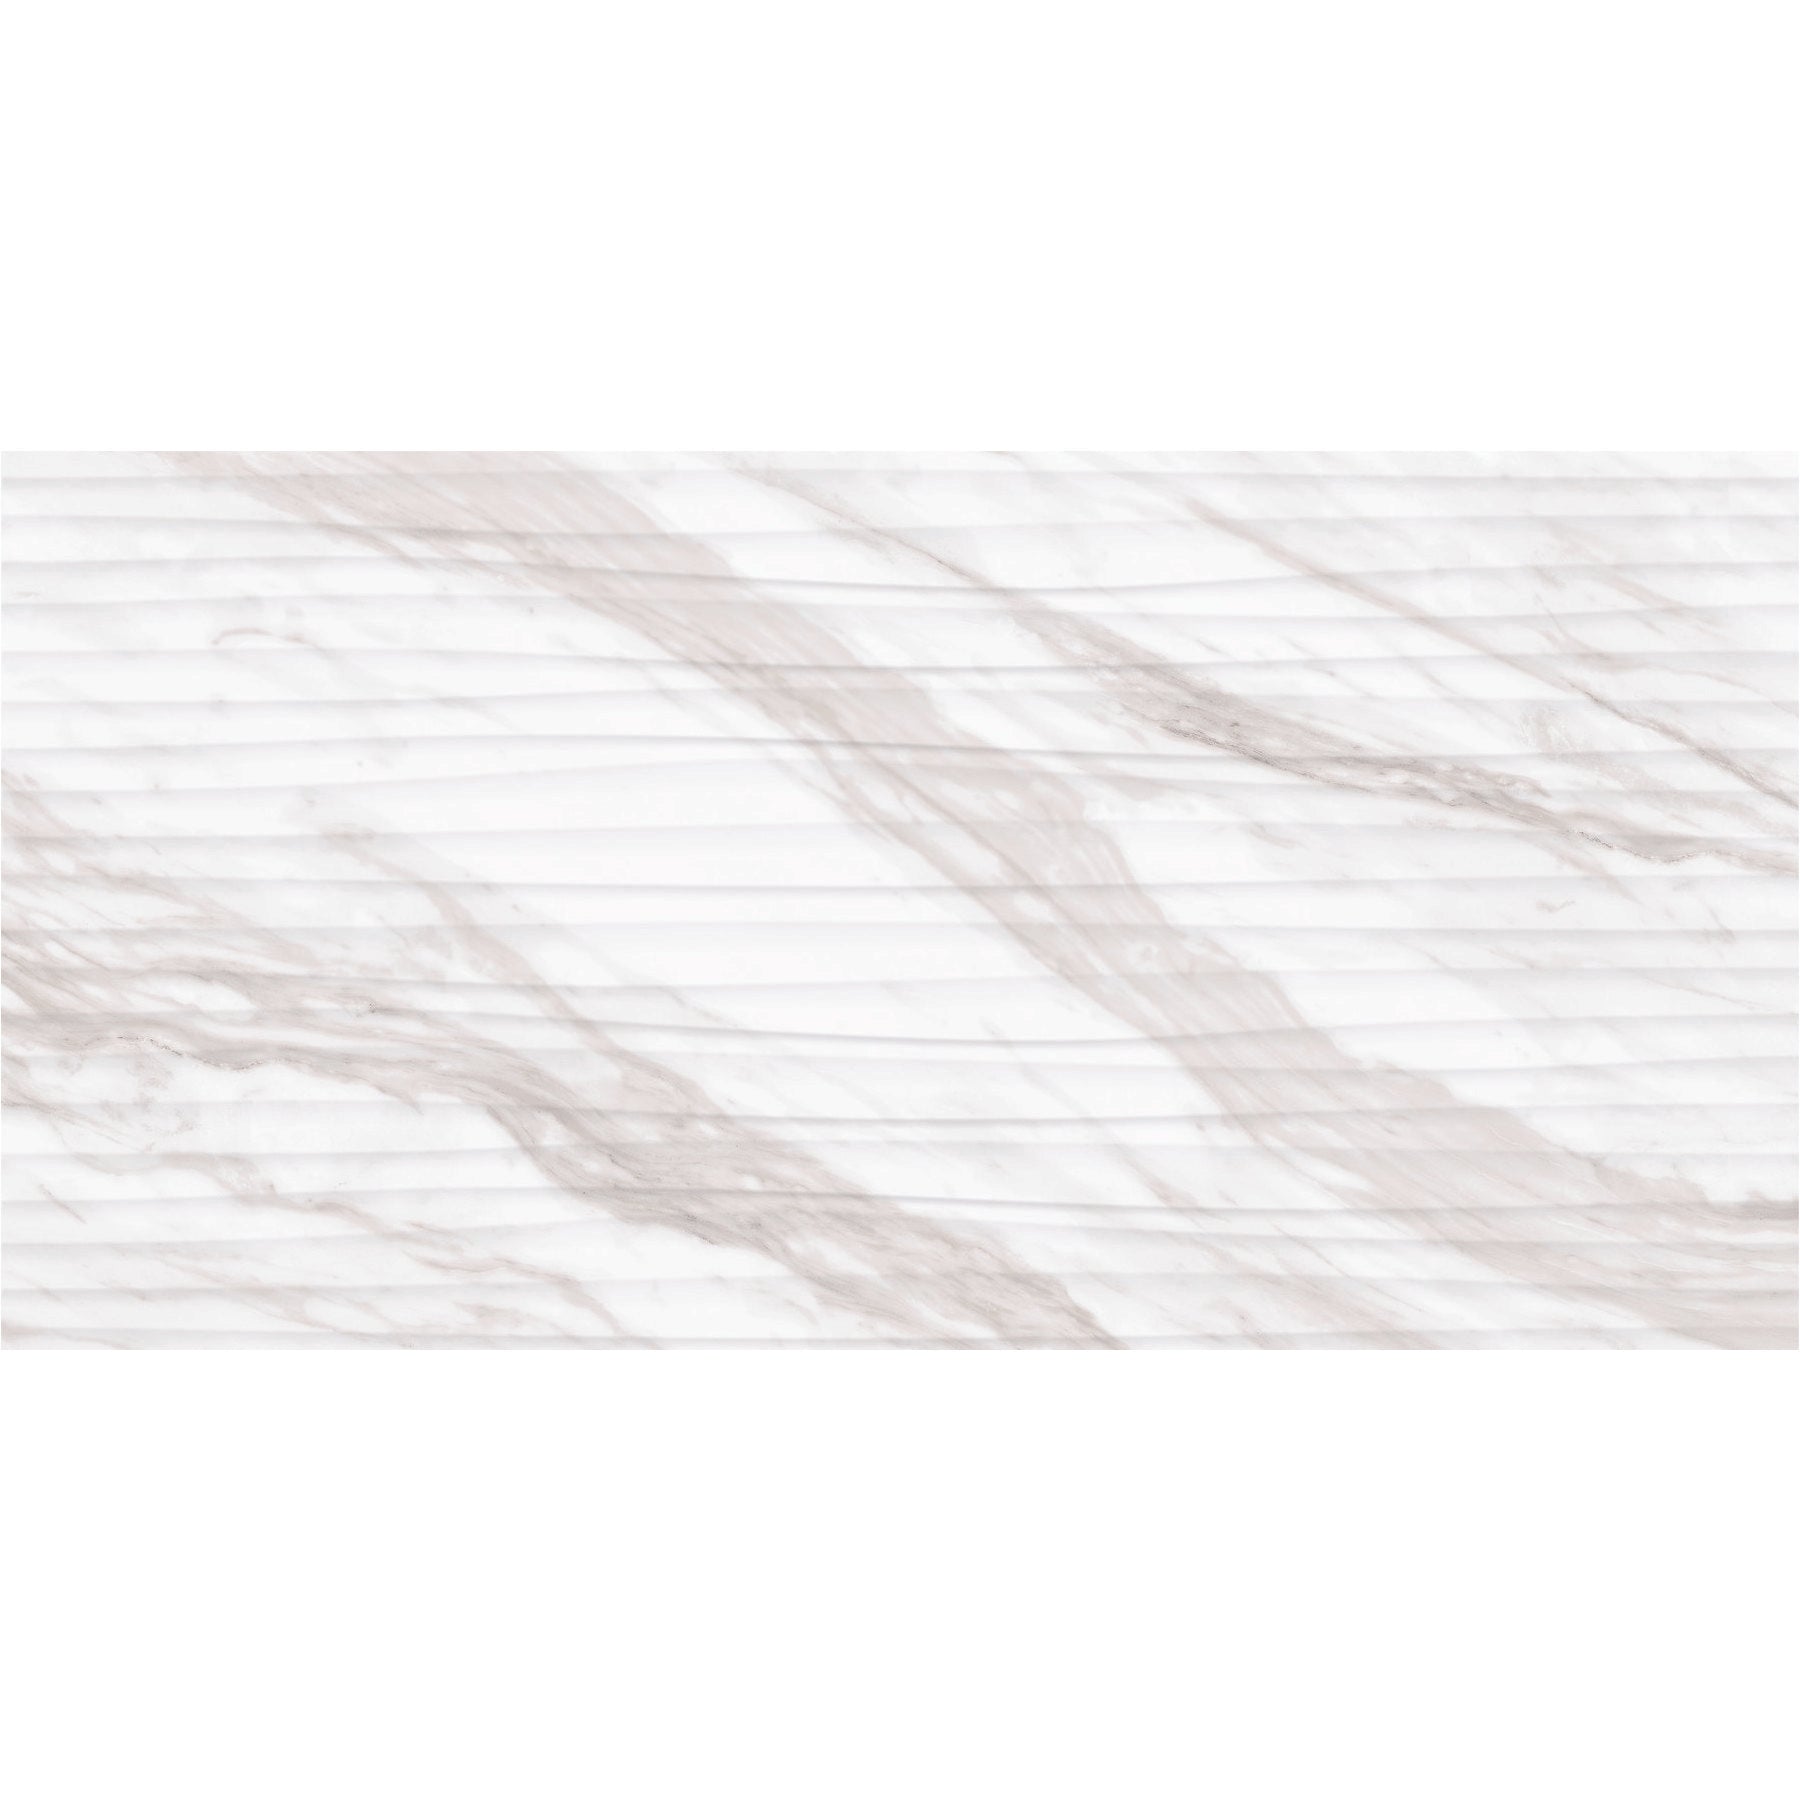 Daltile - Perpetuo - 12 in. x 24 in. Glazed Ceramic Wave Wall Tile - Timeless White